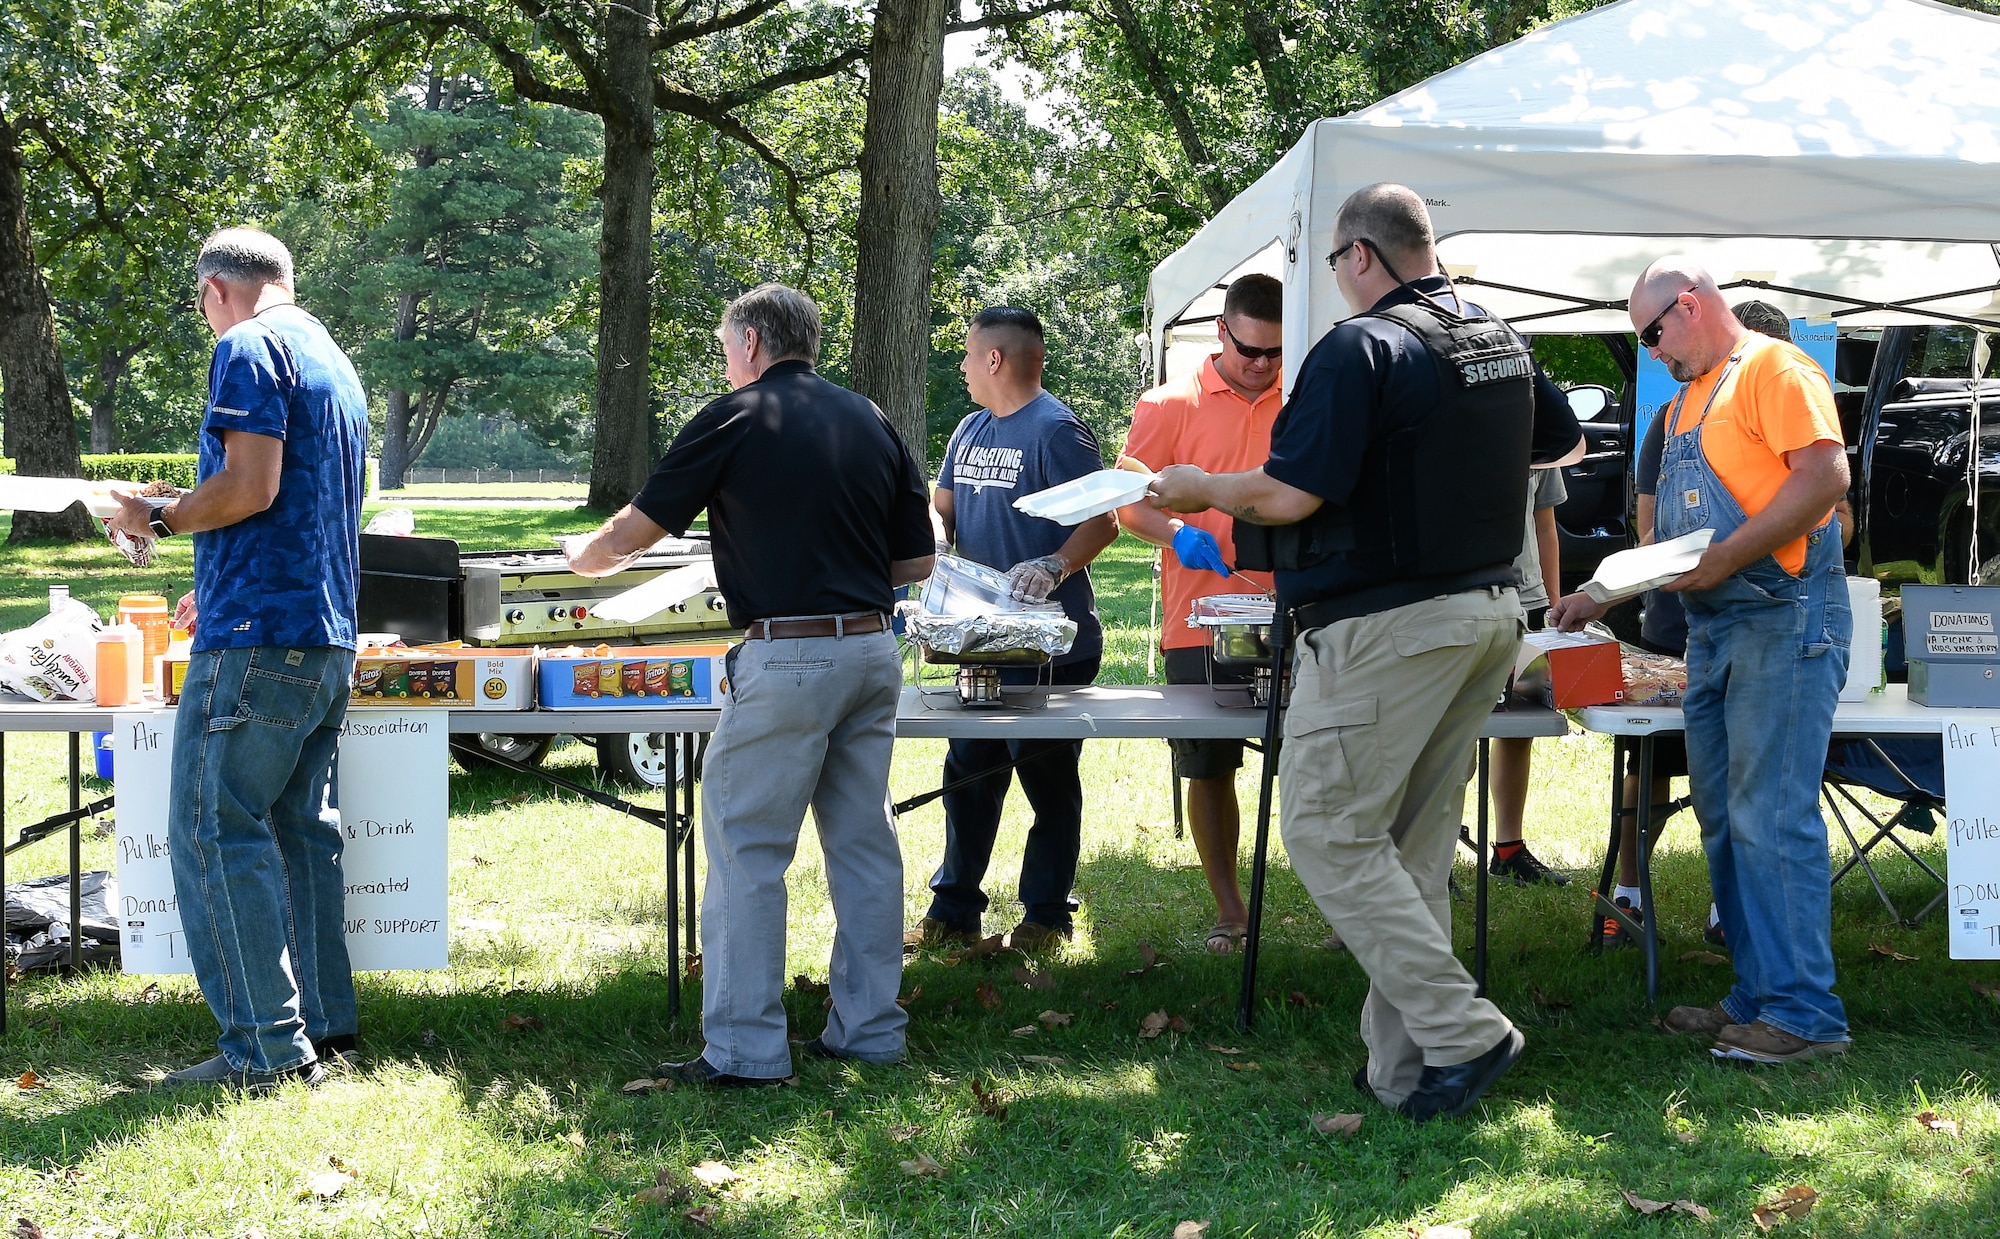 Air Force Sergeant's Association Chapter 477 serves up pulled pork and sides July 26 during a joint event with the Arnold Air Force Base Junior Force Council at Arnold. Funds raised by the AFSA chapter are used to support community events such as the Military Appreciation Day and the AEDC Children's Christmas Party. (U.S. Air Force photo by Jill Pickett)